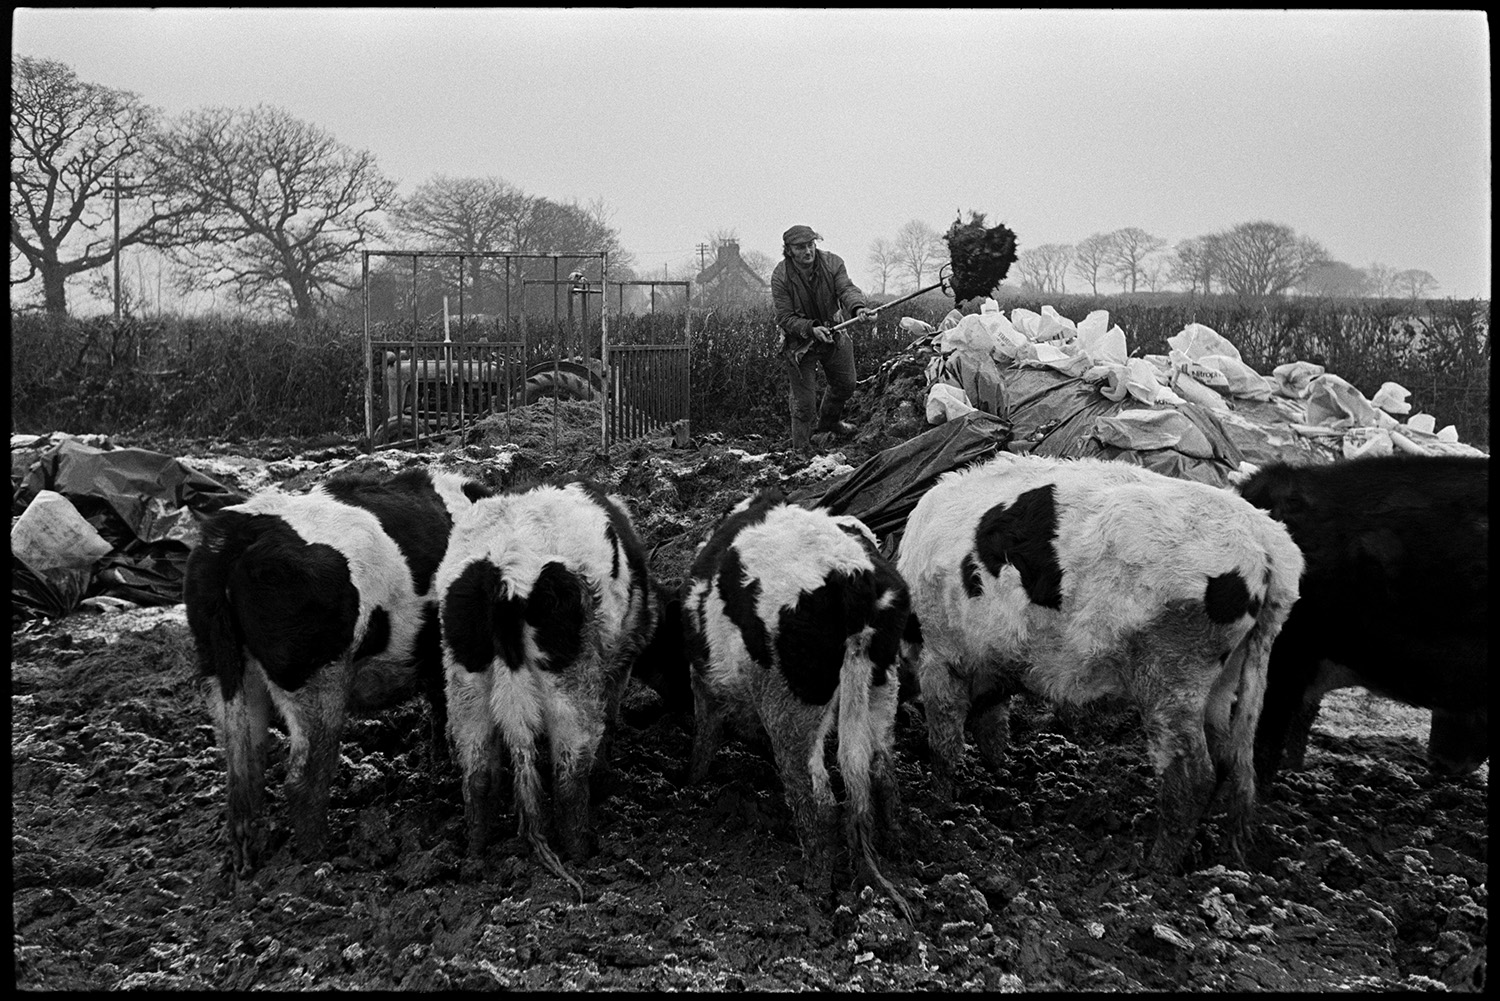 Farmer loading silage onto trailer to feed cattle.
[Peter Jones forking silage, from a silage clamp partially covered with polythene, into a trailer hooked to a tractor. A herd of cows are feeding from the heap of silage, in the muddy field at Upcott, Dolton. In the background can be seen a building and hedgerows with trees.]